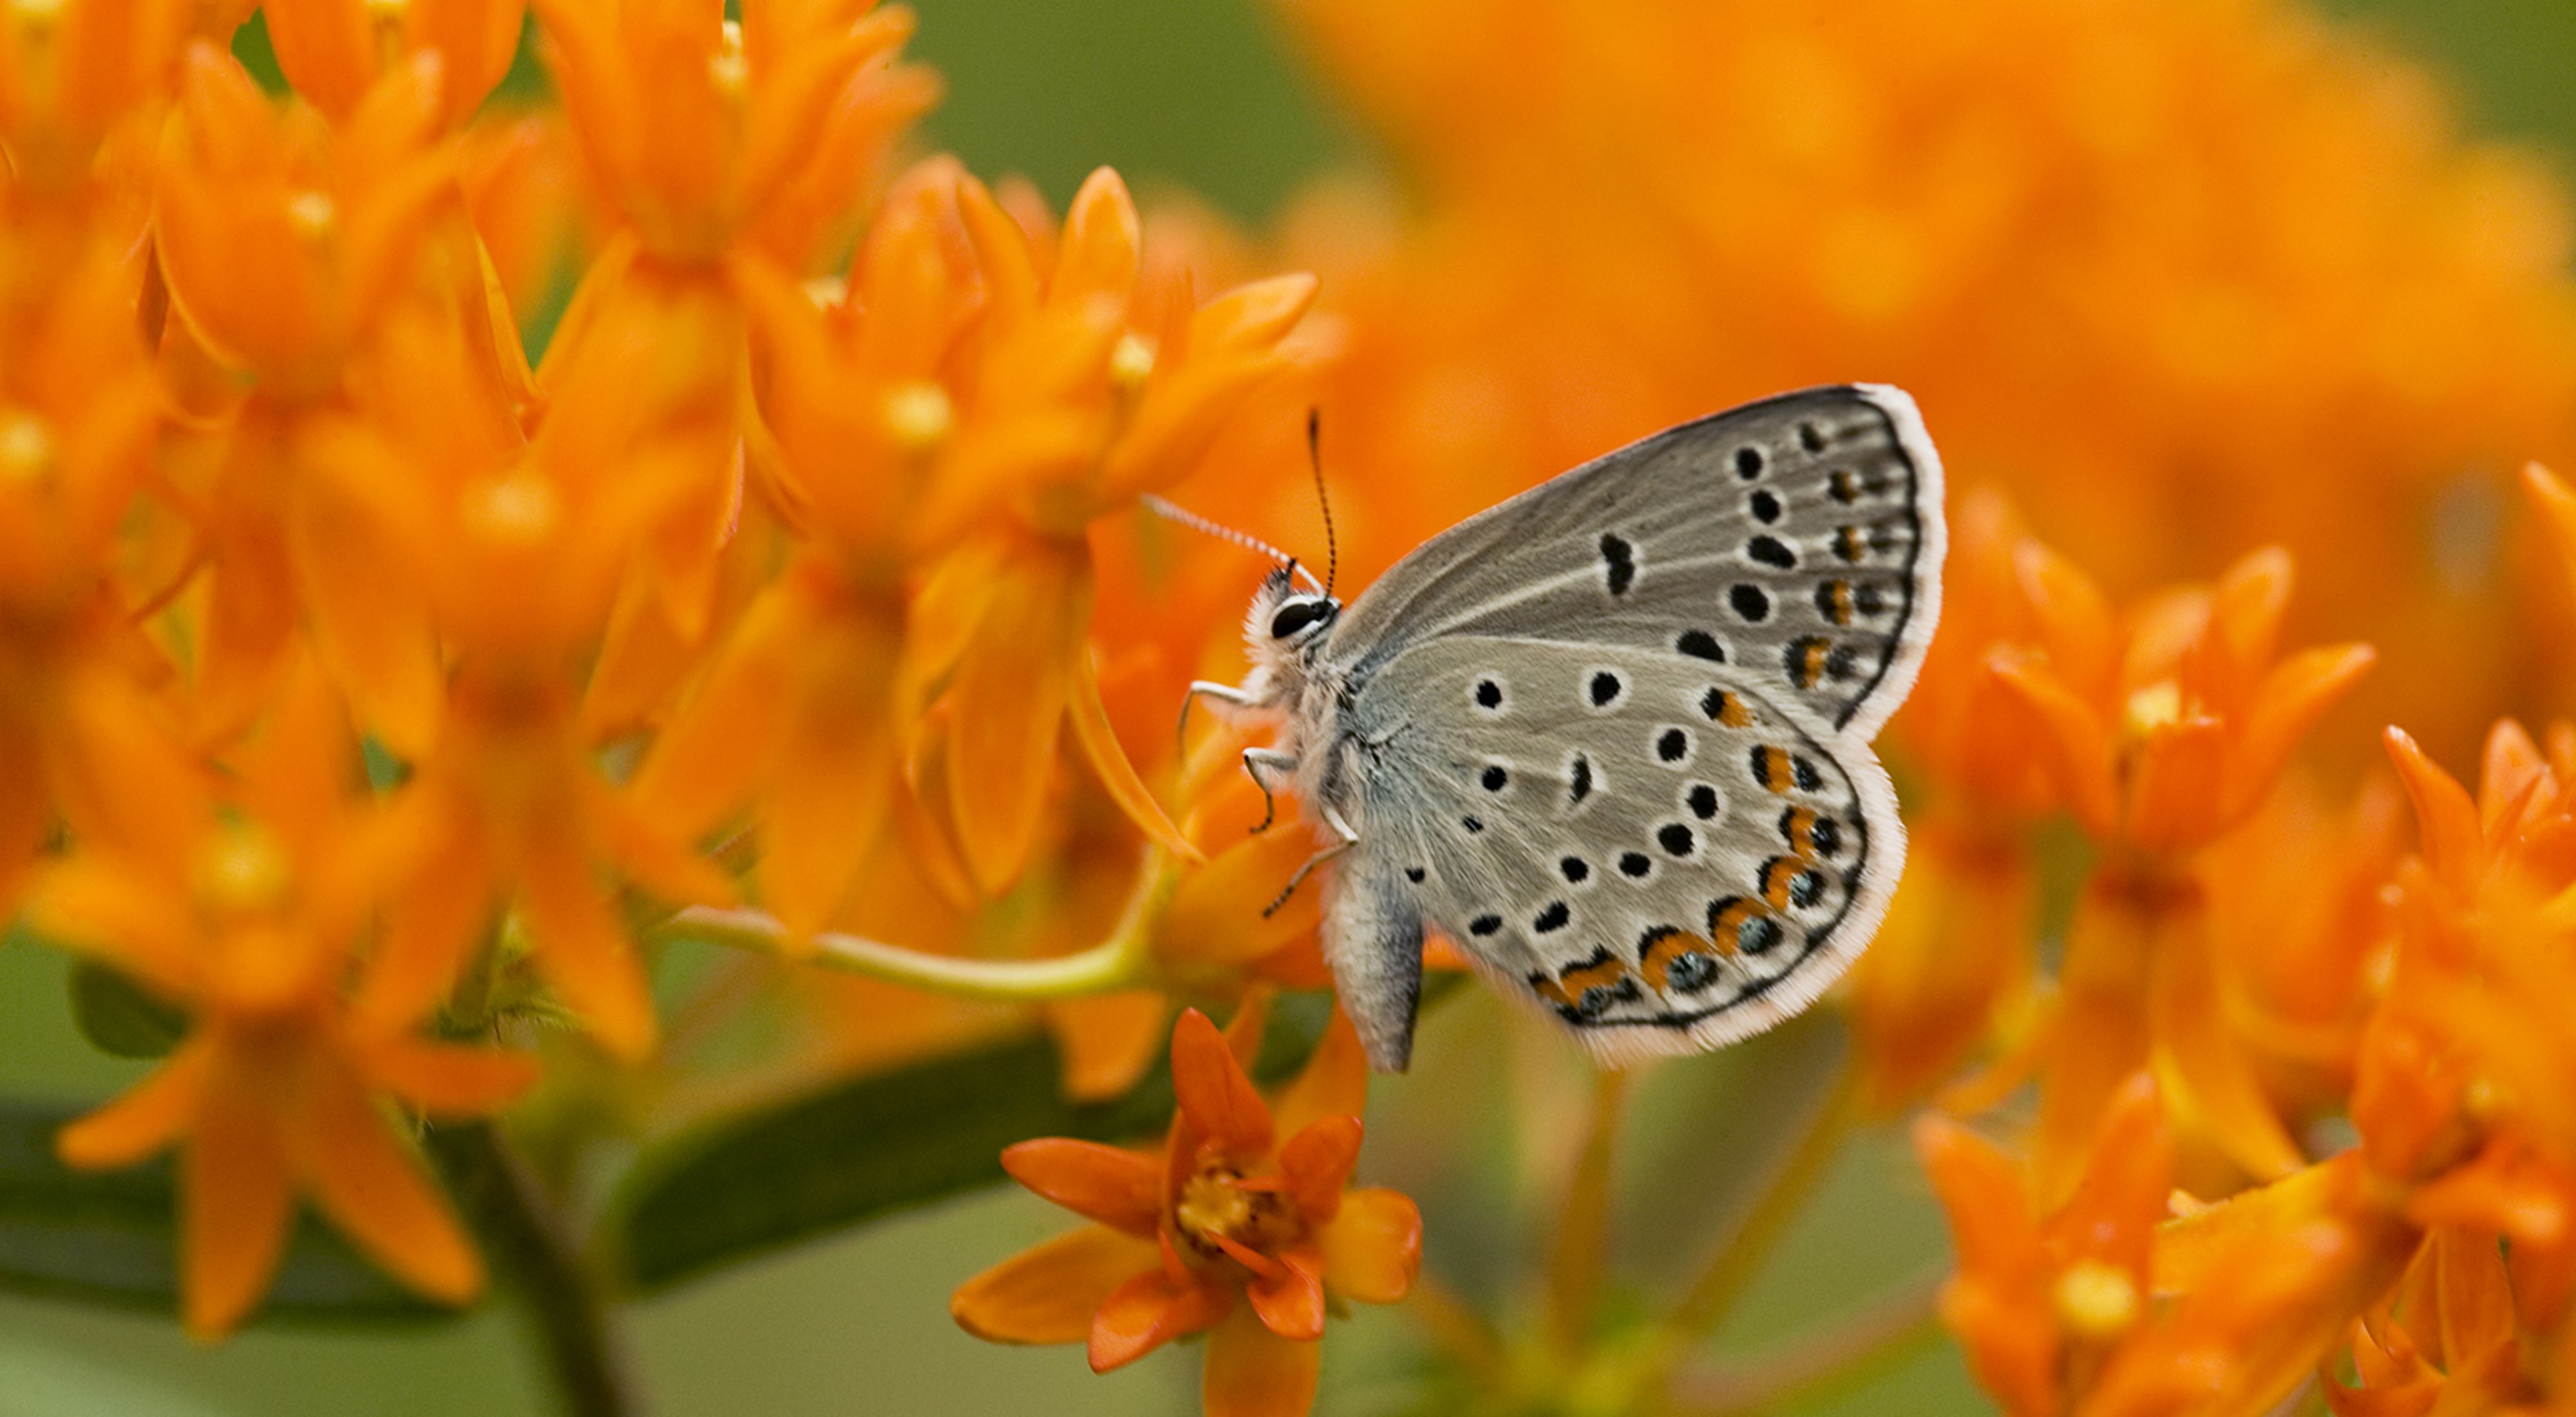 A small blue-gray butterfly with dark spots sits on a cluster of small, bright orange flowers.